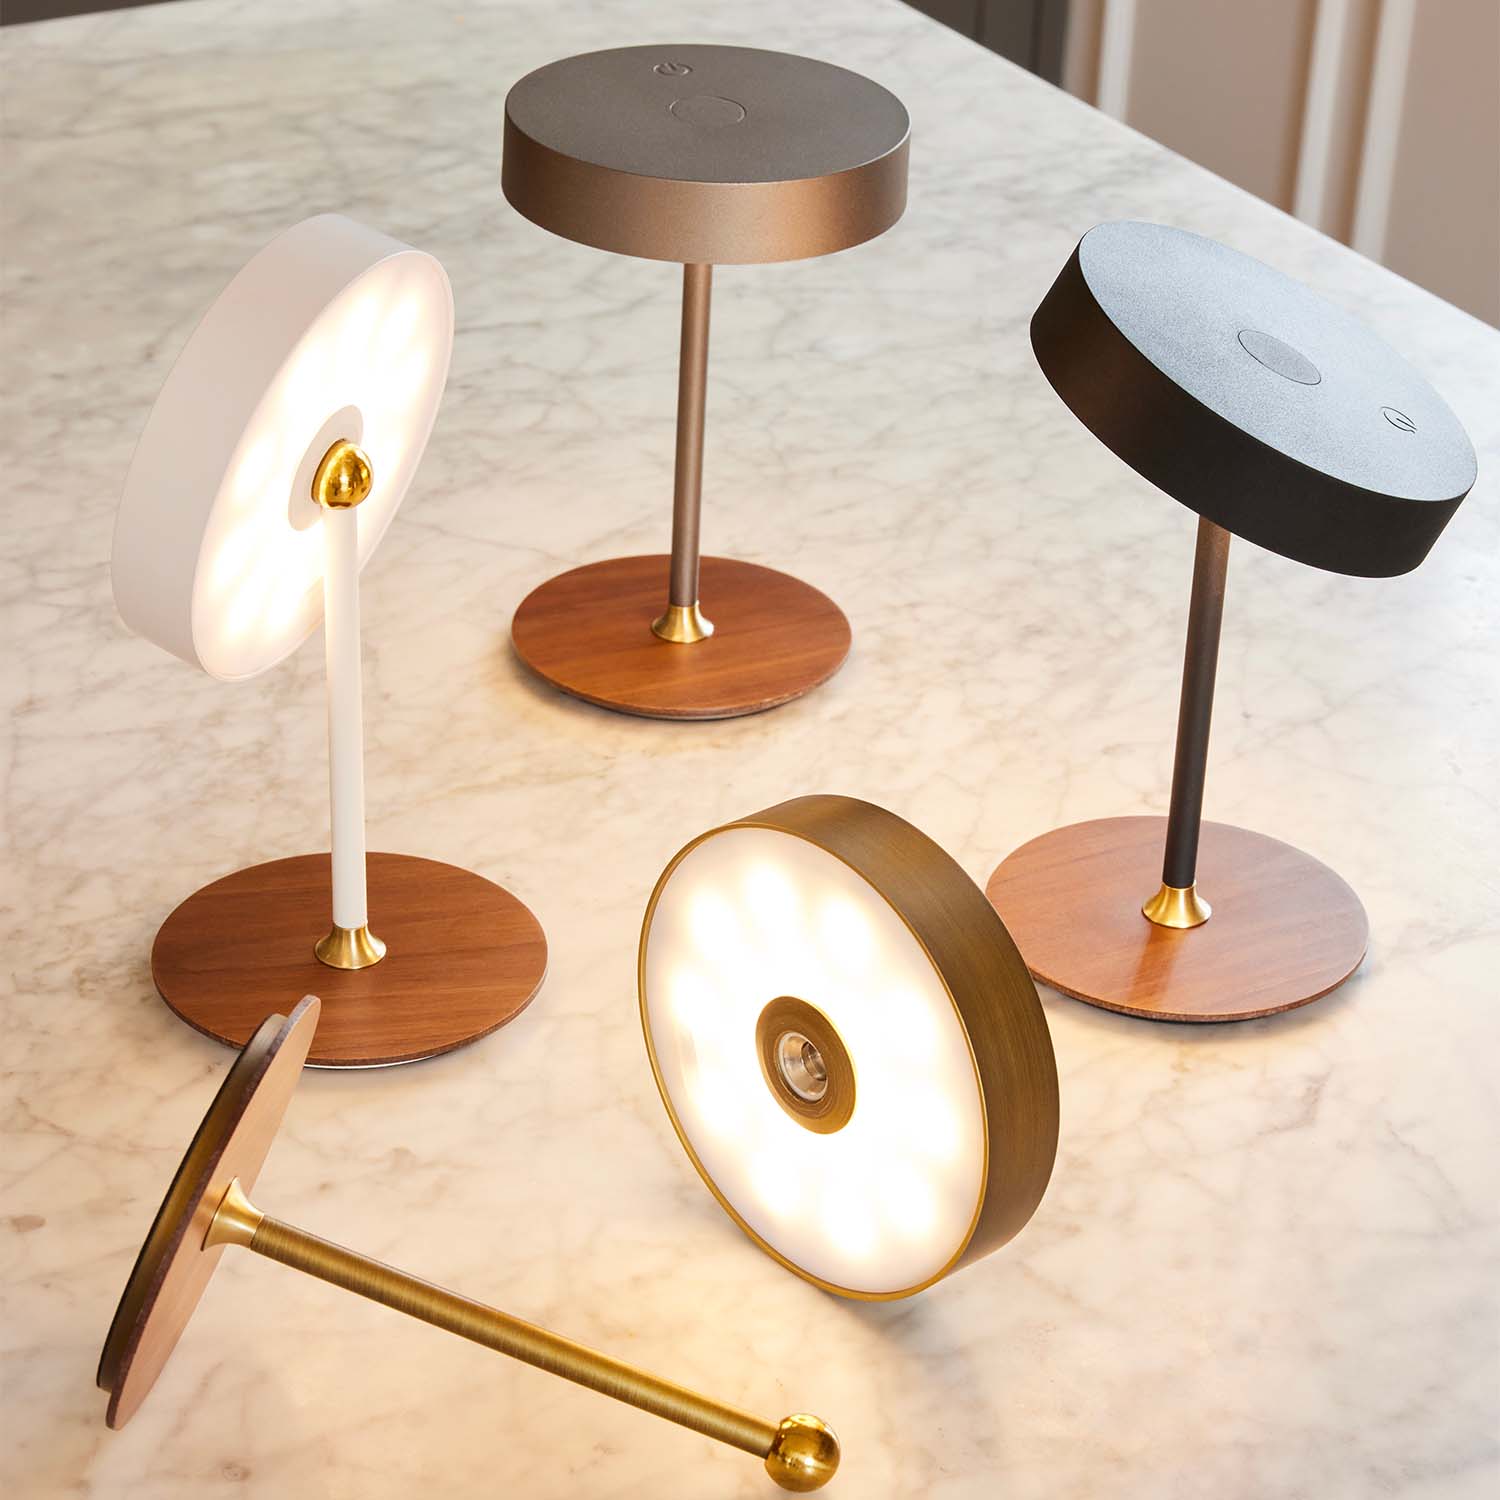 ON THE MOVE - Adjustable wireless designer nomadic table lamp